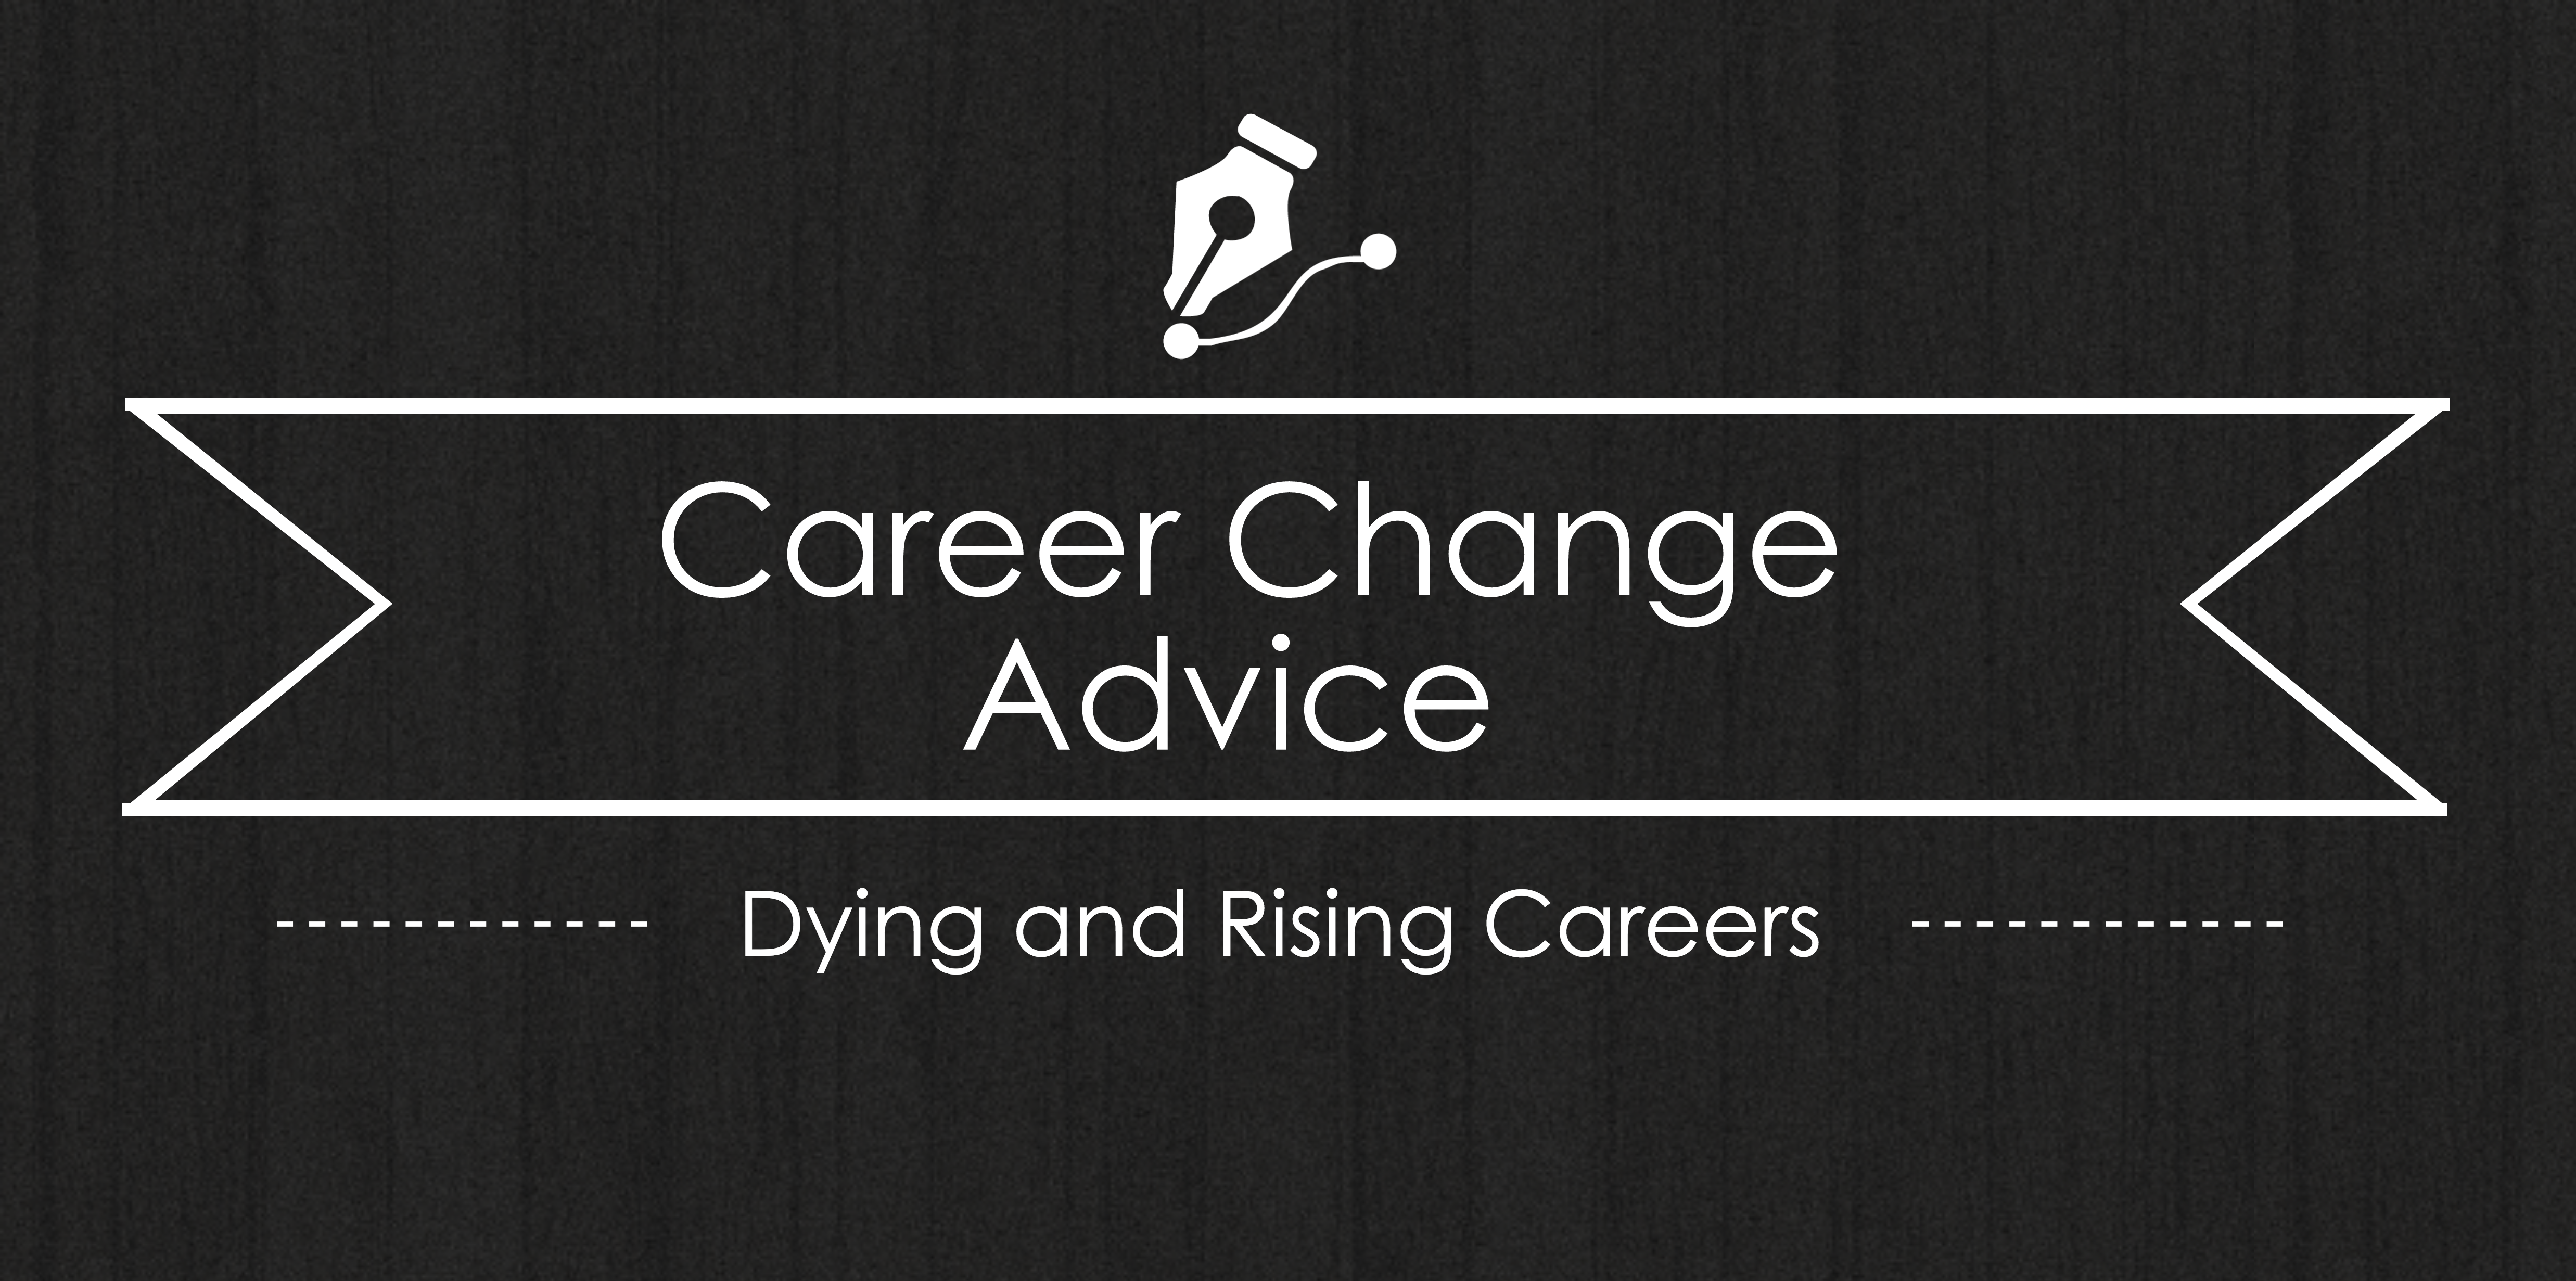 Career Glider - Dying and Rising Careers